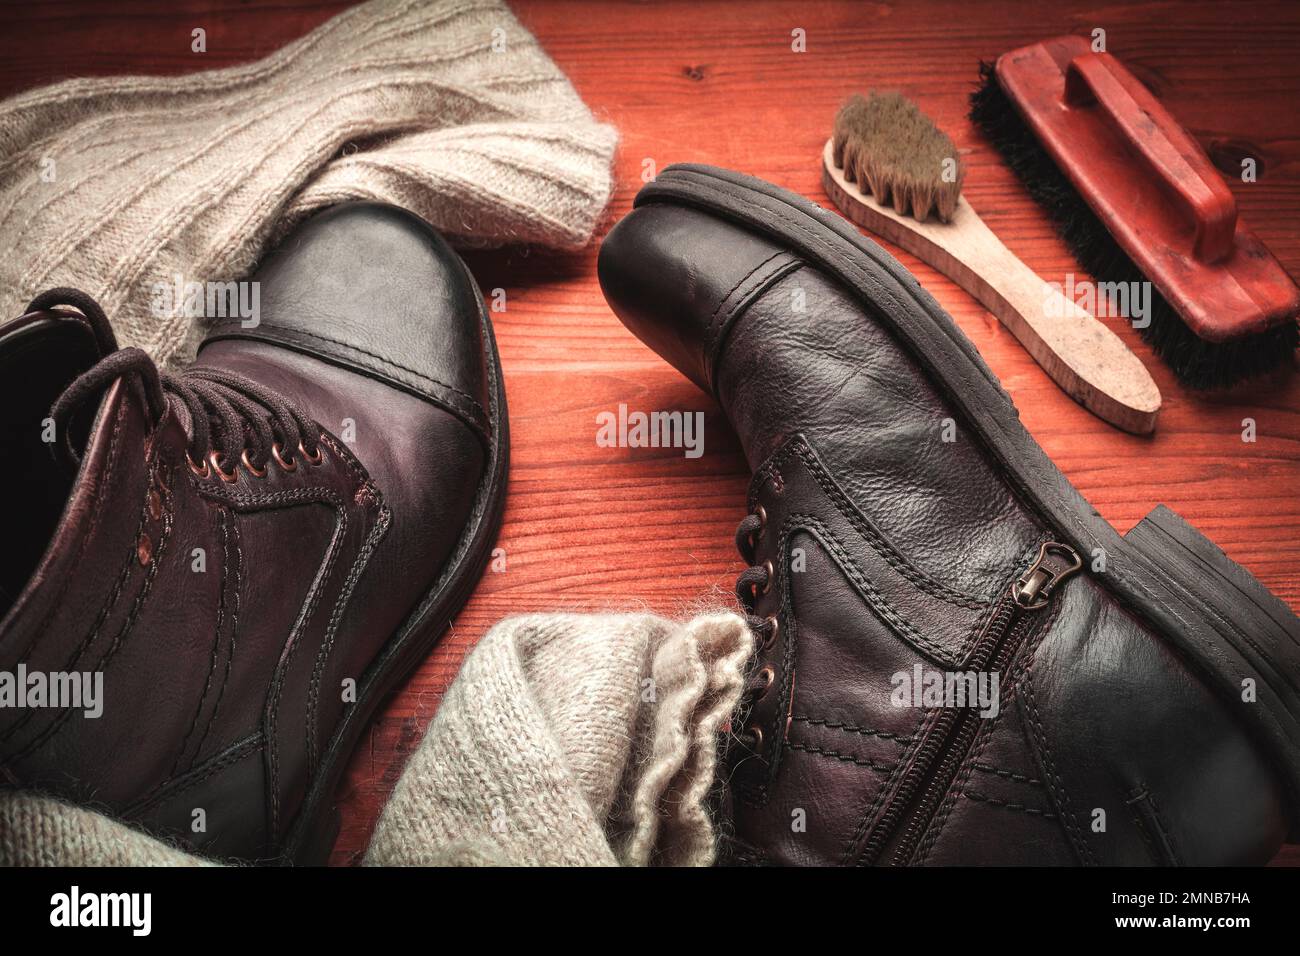 Concept of care and cleaning of vintage leather boots with wax, cream, sponge and brush Stock Photo